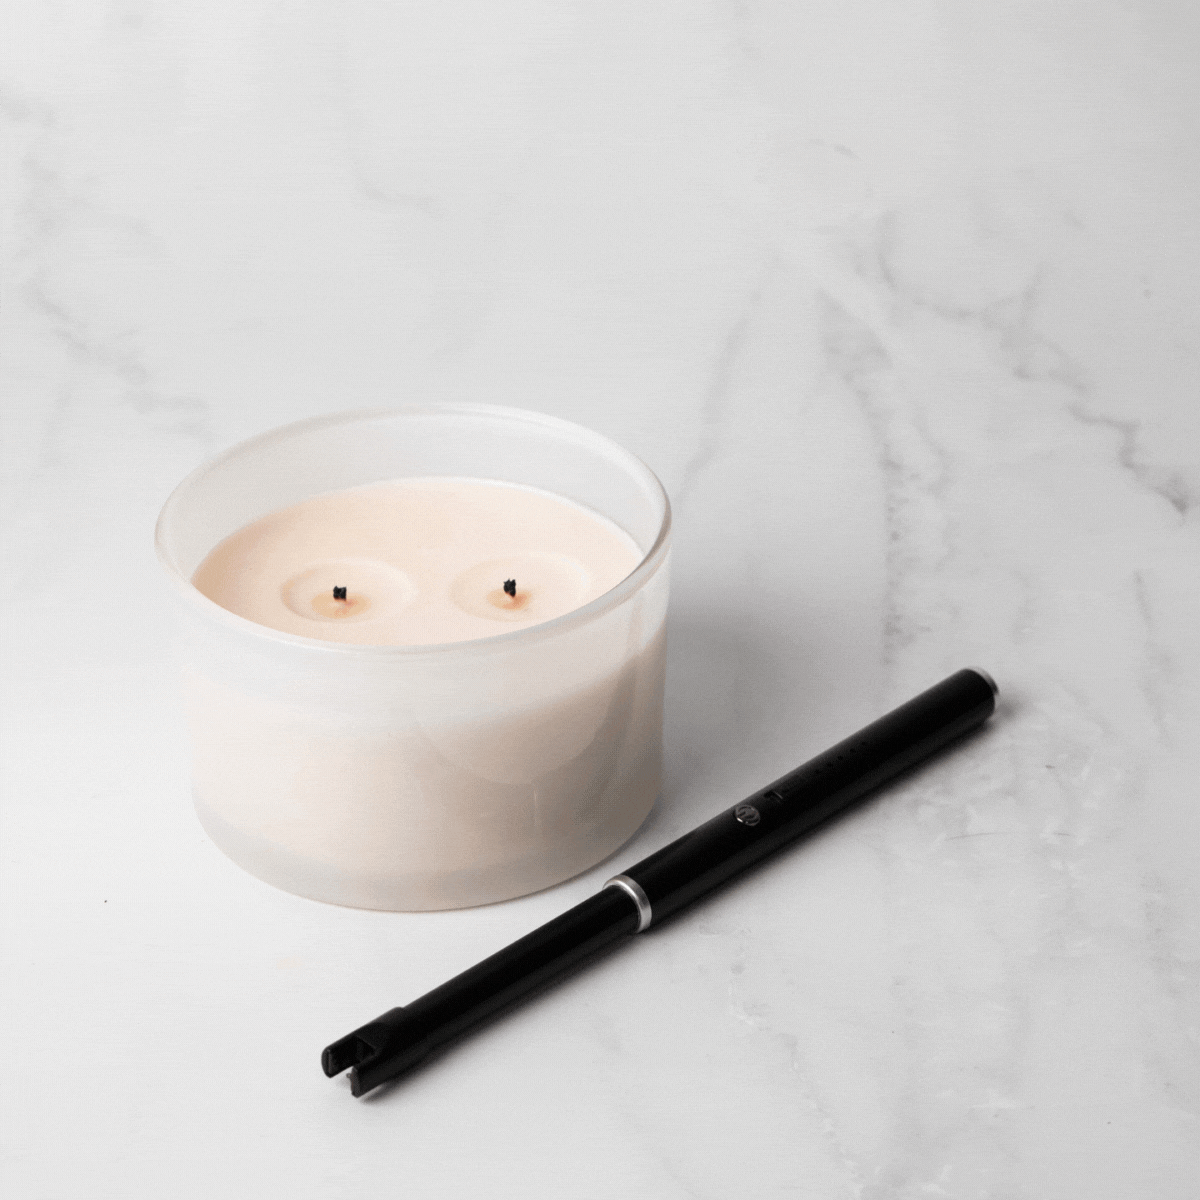 USB Rechargeable Candle and Incense Lighter - Black Lighter pictured lighting twin wick candle - Stocked at LOVINLIFE Co Byron Bay for all your gifts, candles and interior decorating needs